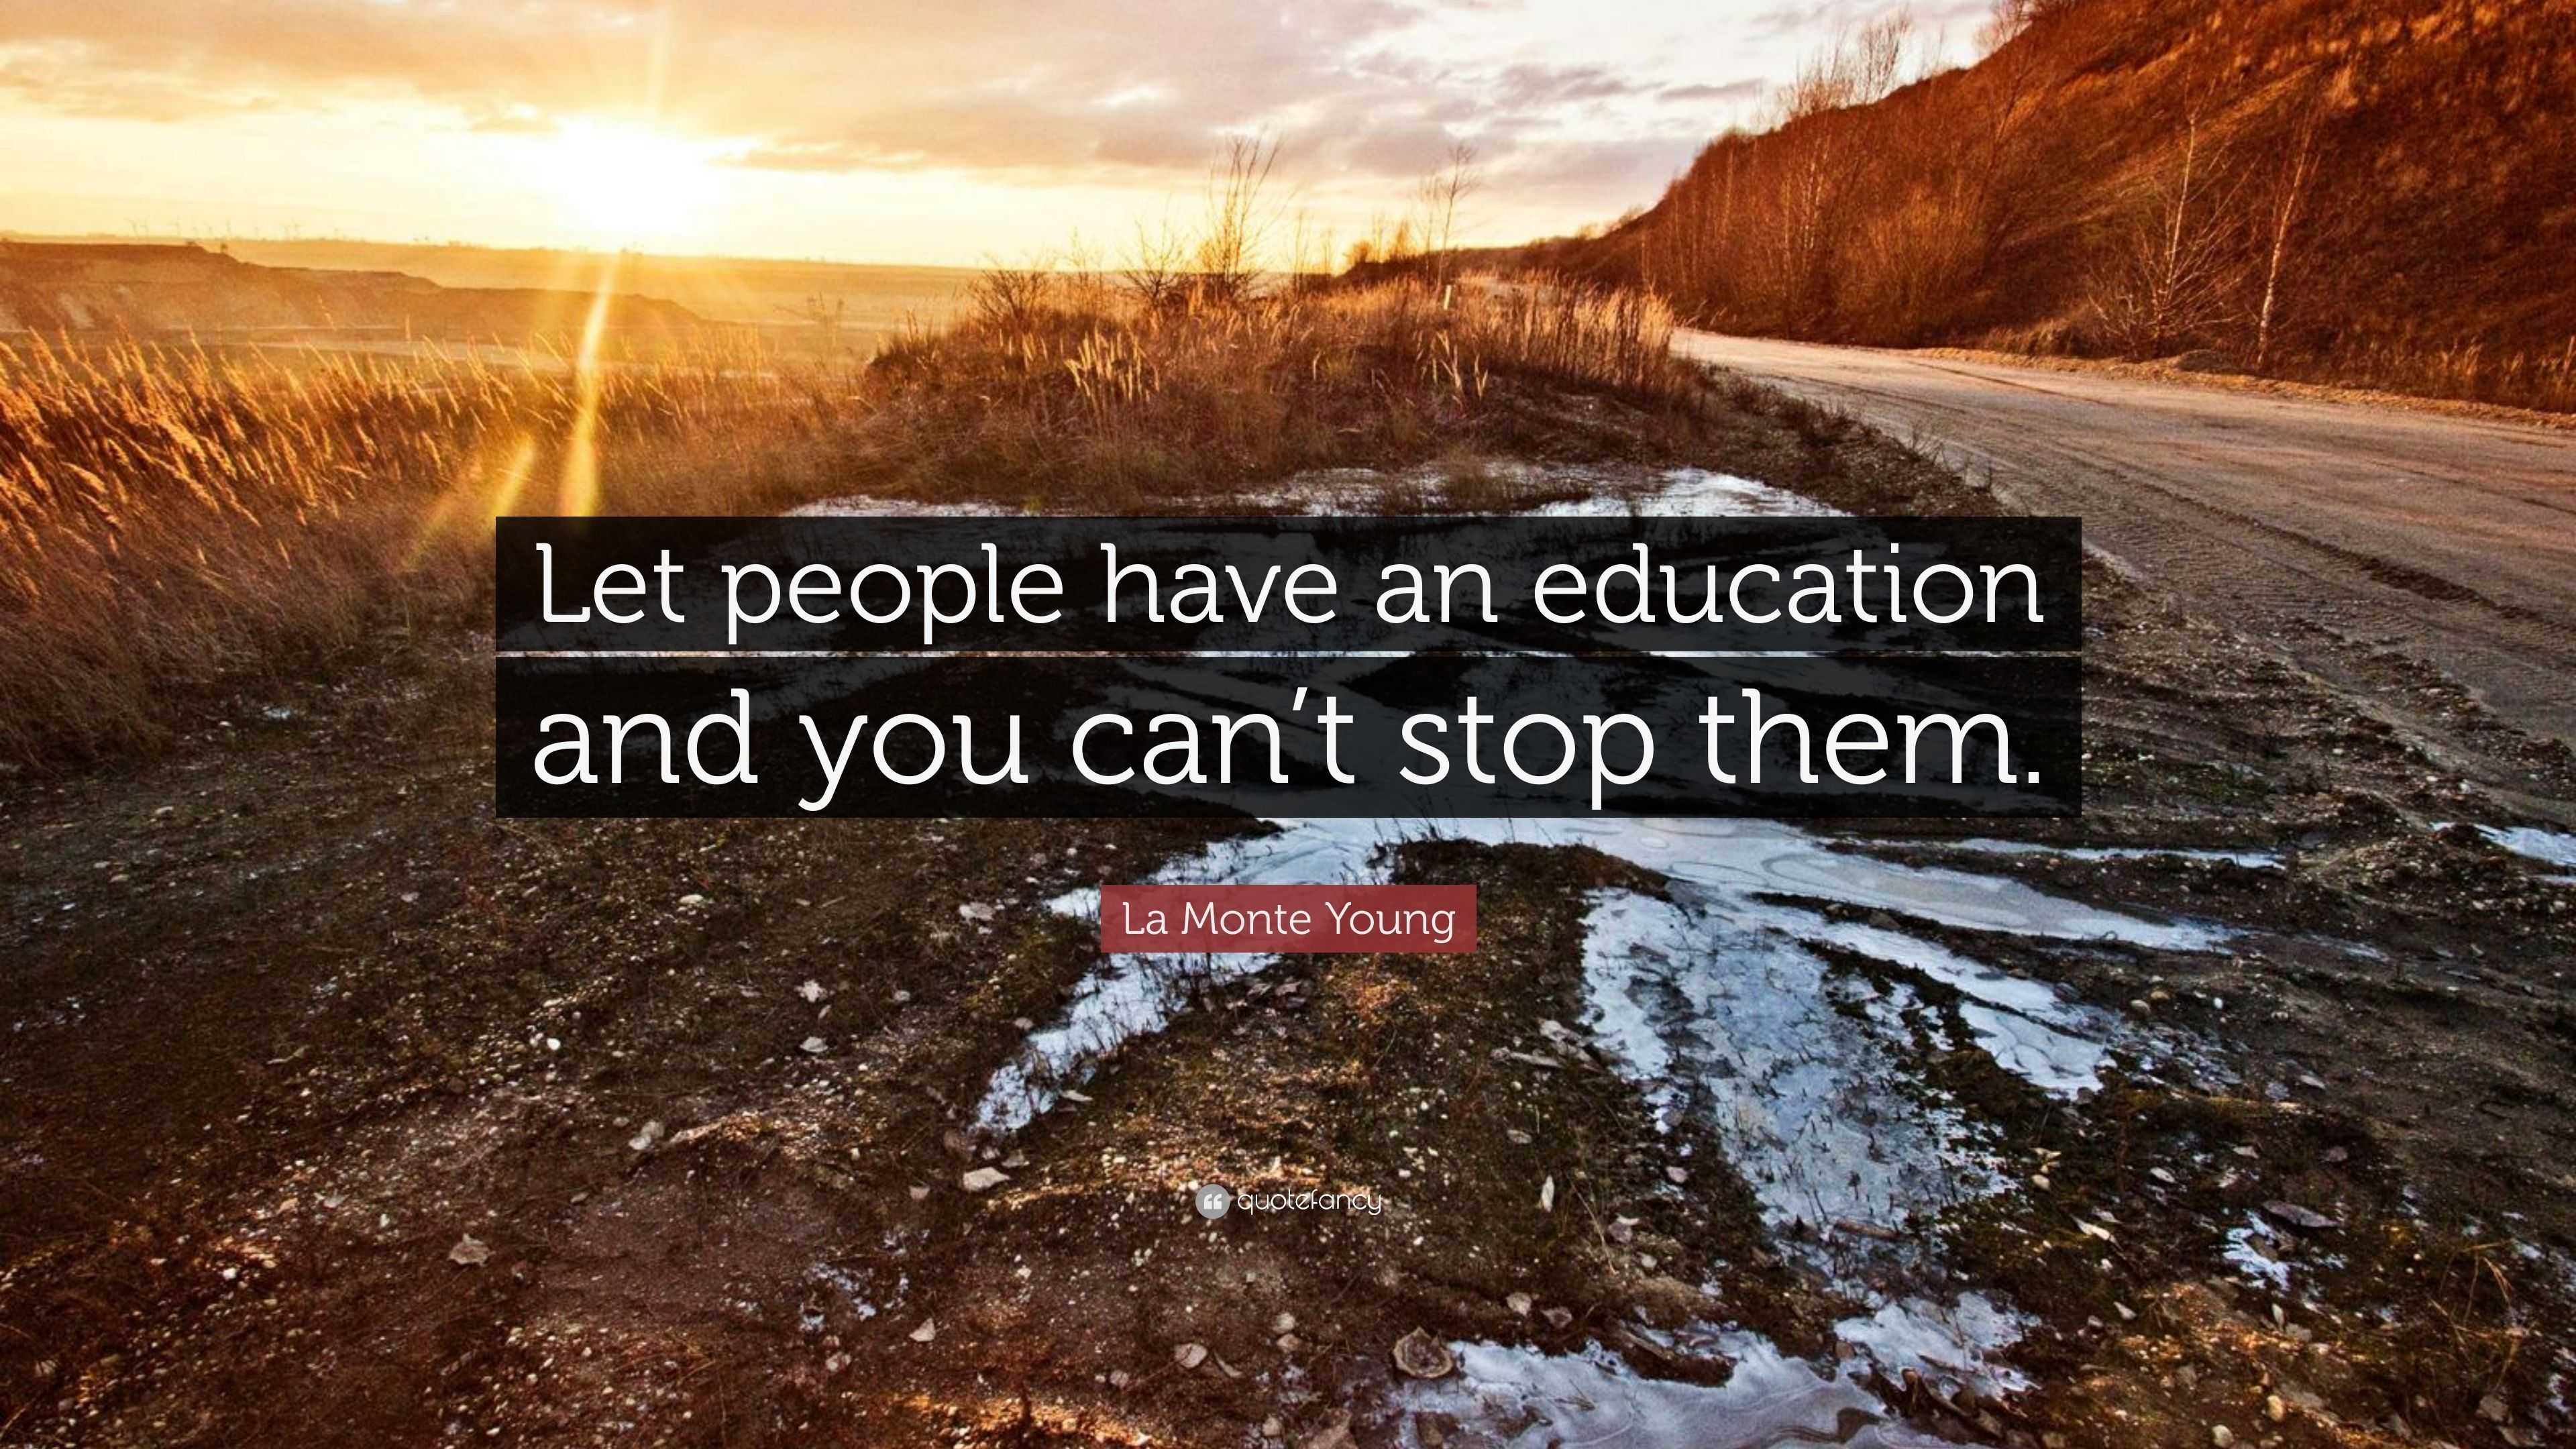 La Monte Young Quote: “Let people have an education and you can’t stop ...